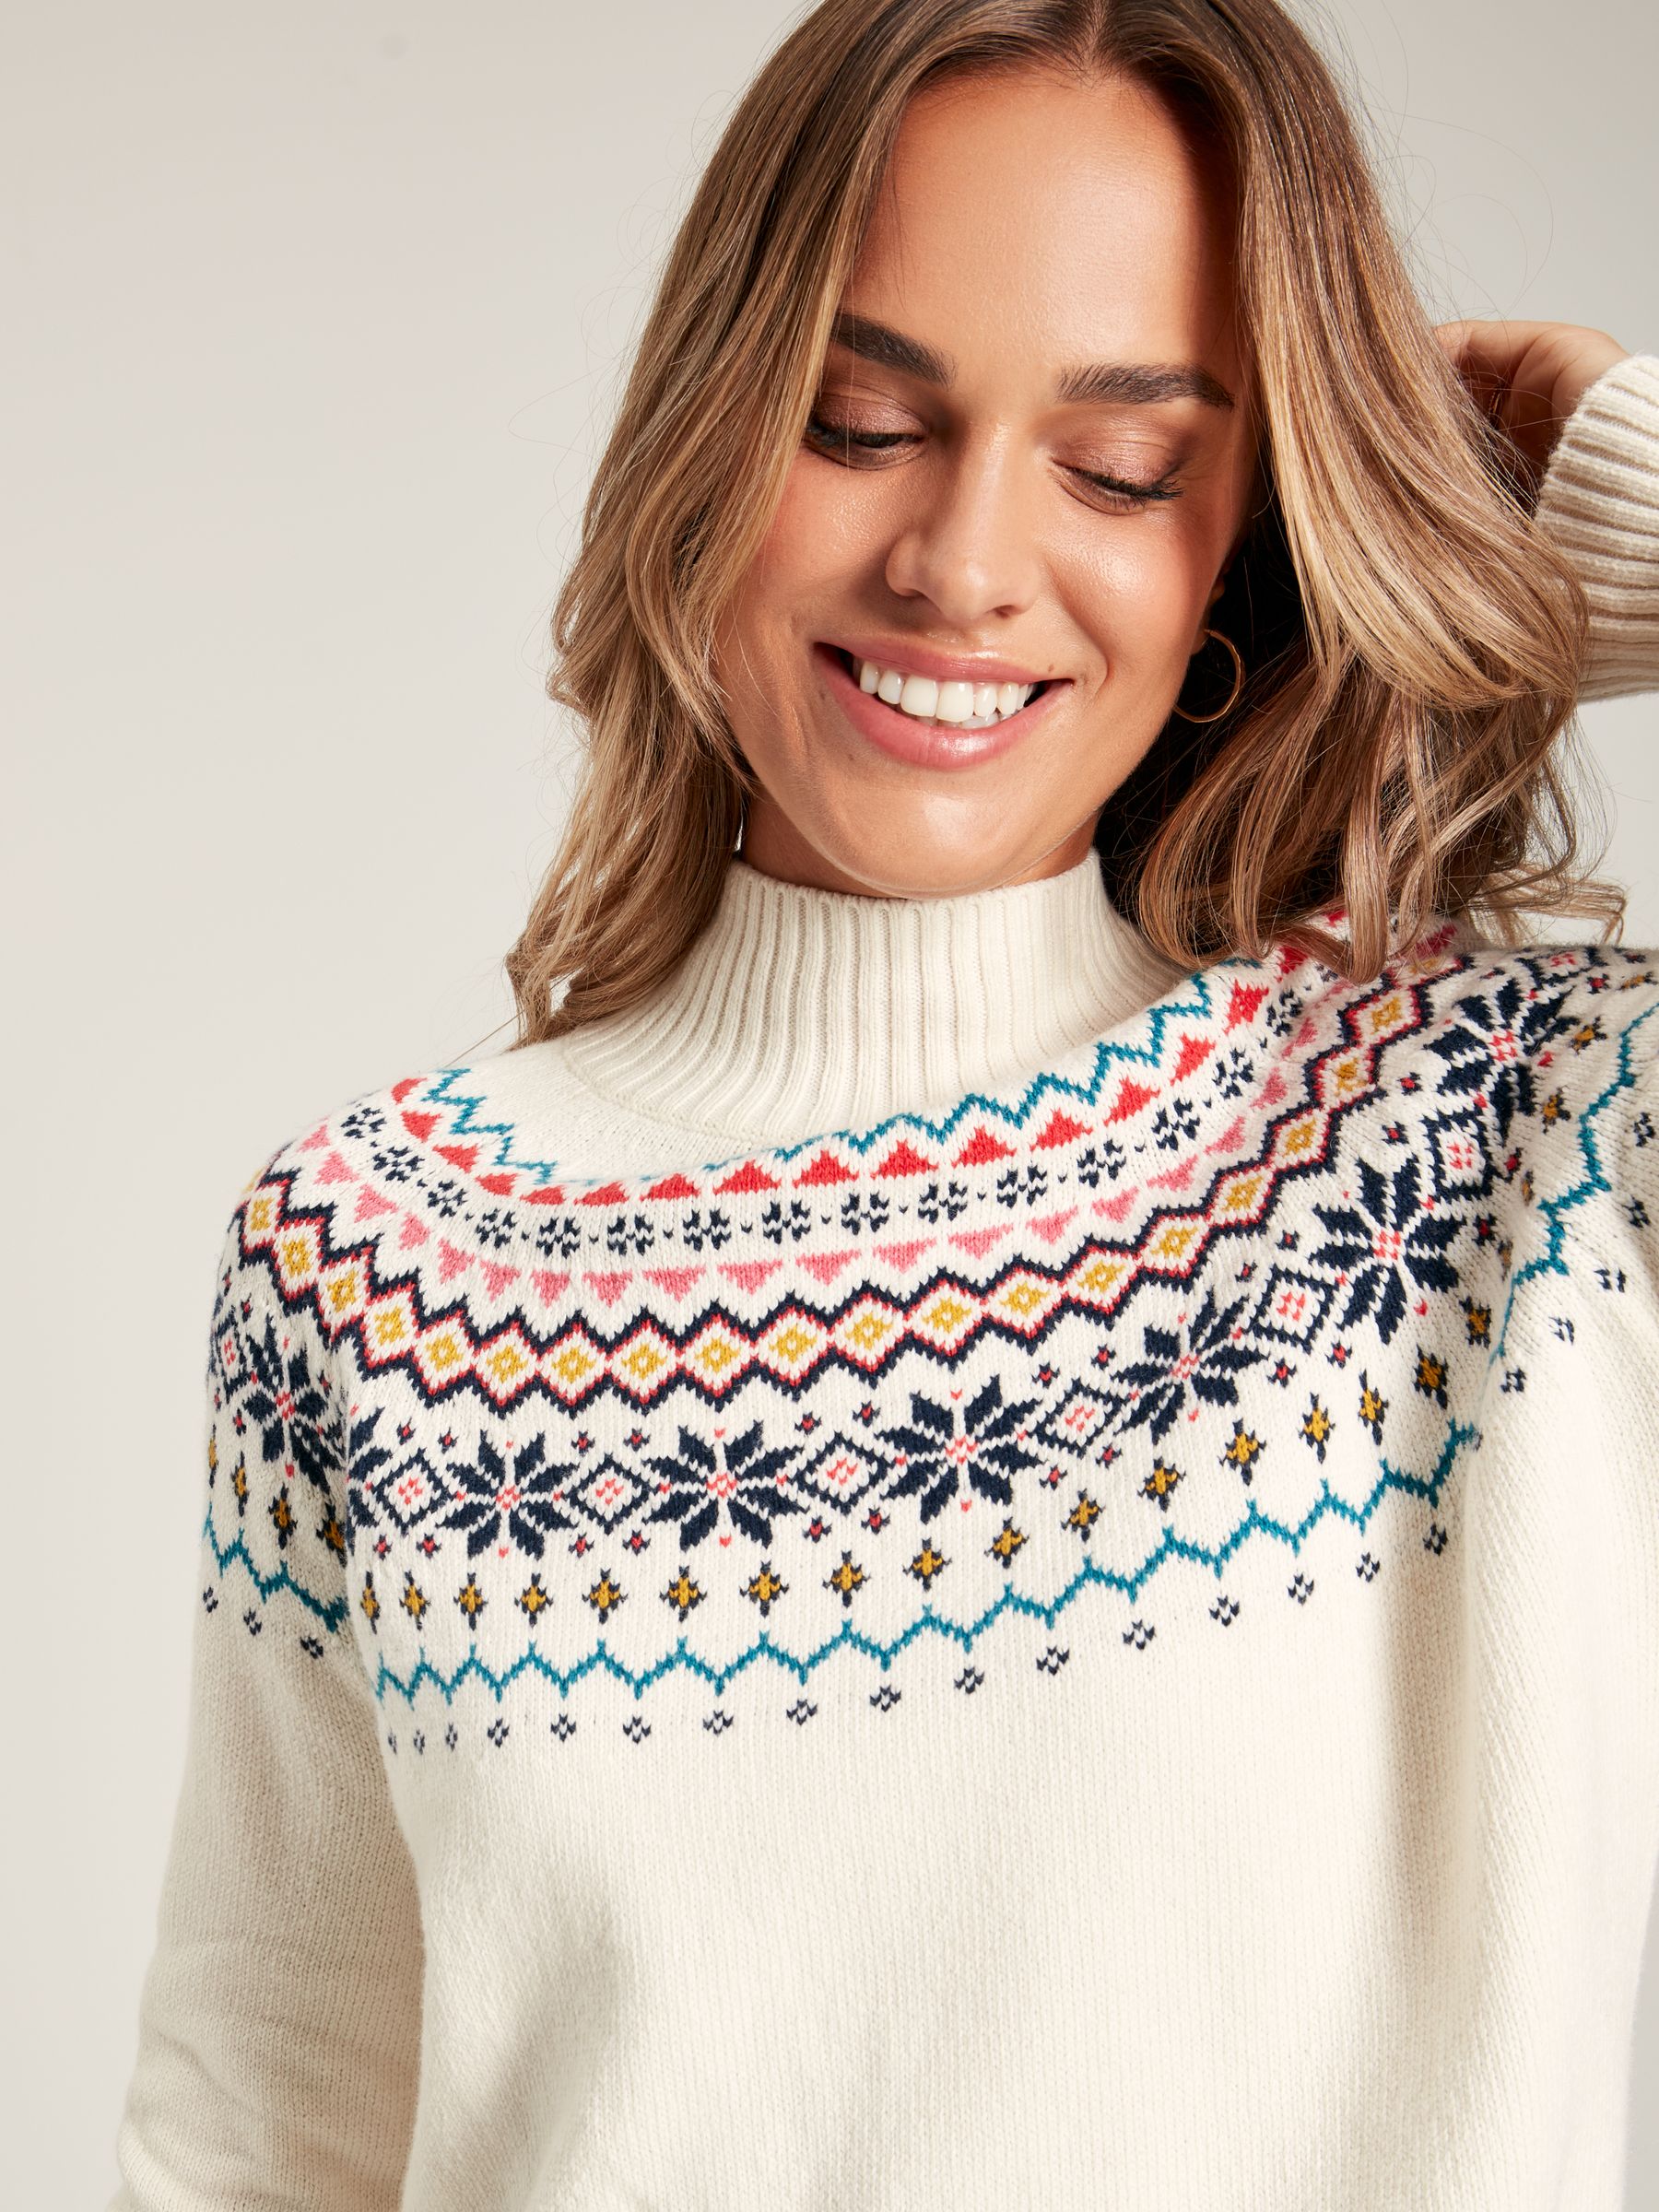 Buy Alba Cream Fair Isle Jumper from the Joules online shop